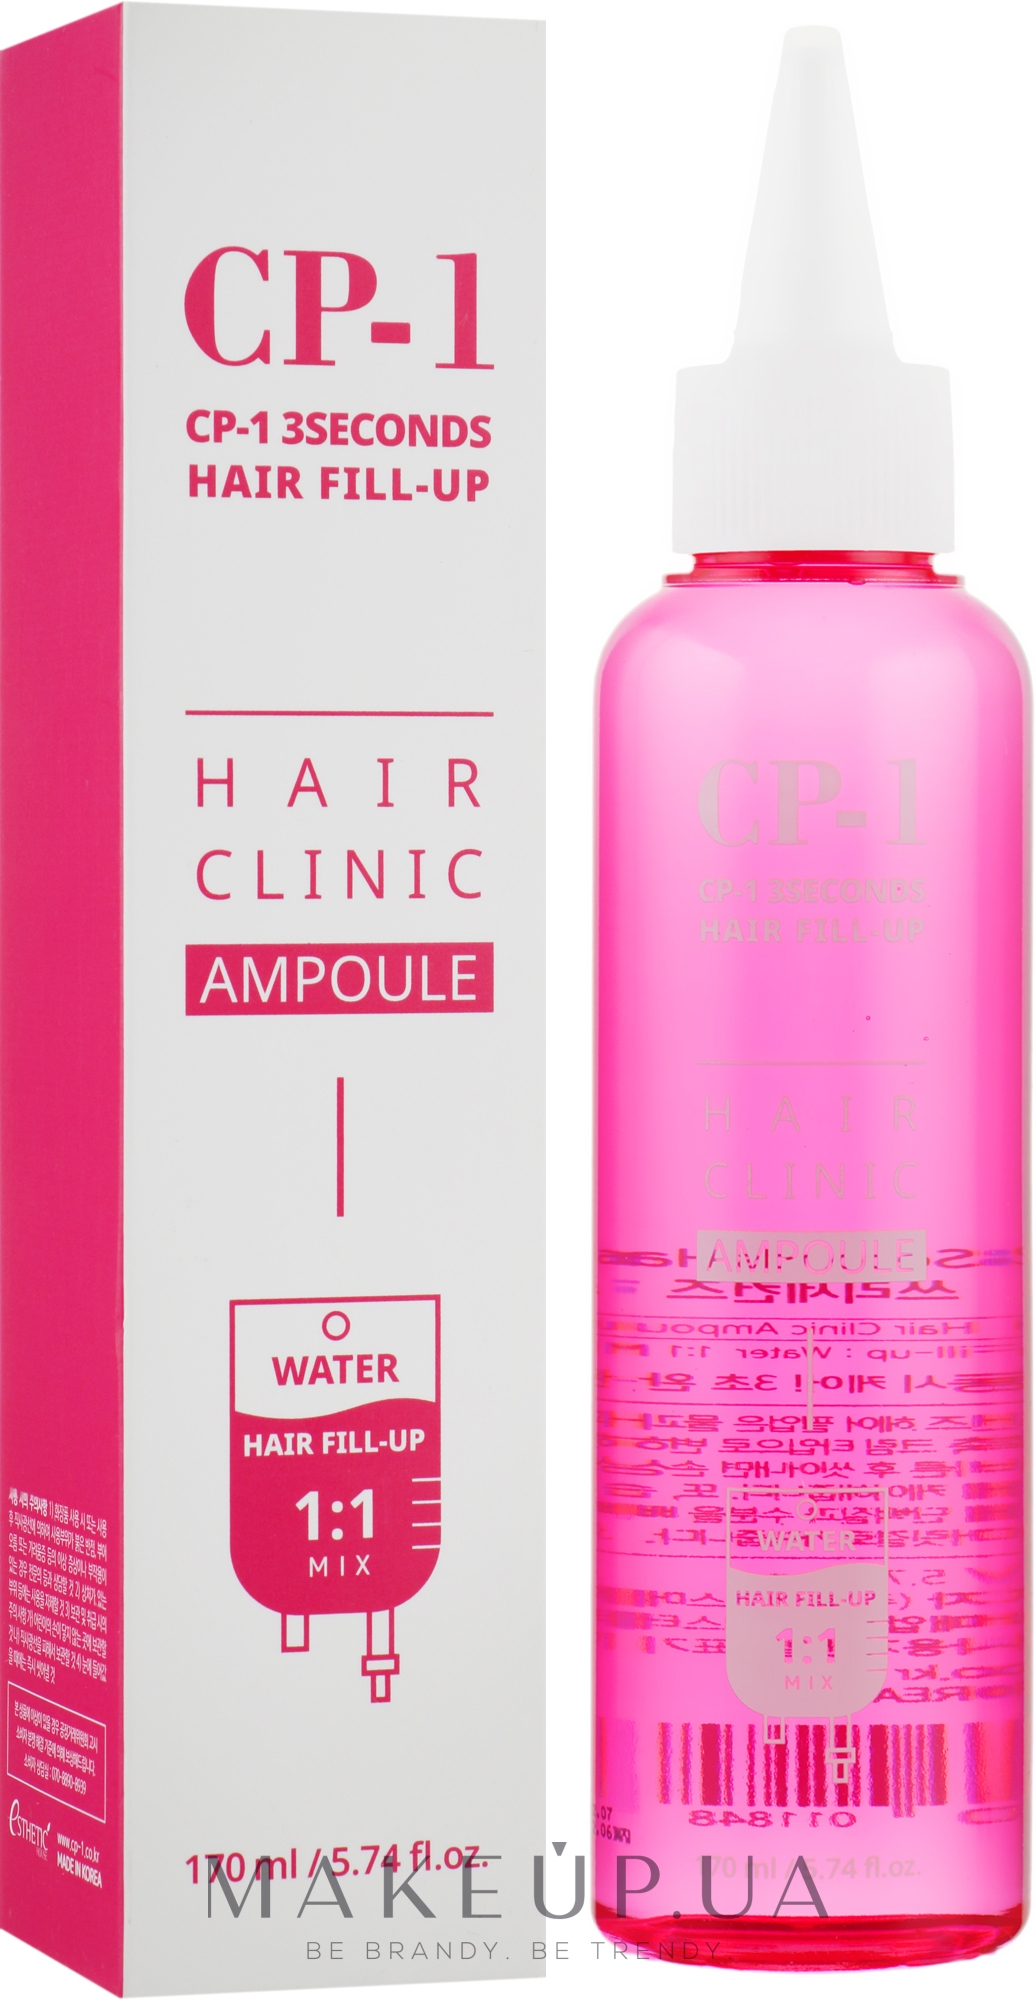 Филлер для волос - Esthetic House CP-1 3 Seconds Hair Ringer Hair Fill-up Ampoule — фото 170ml